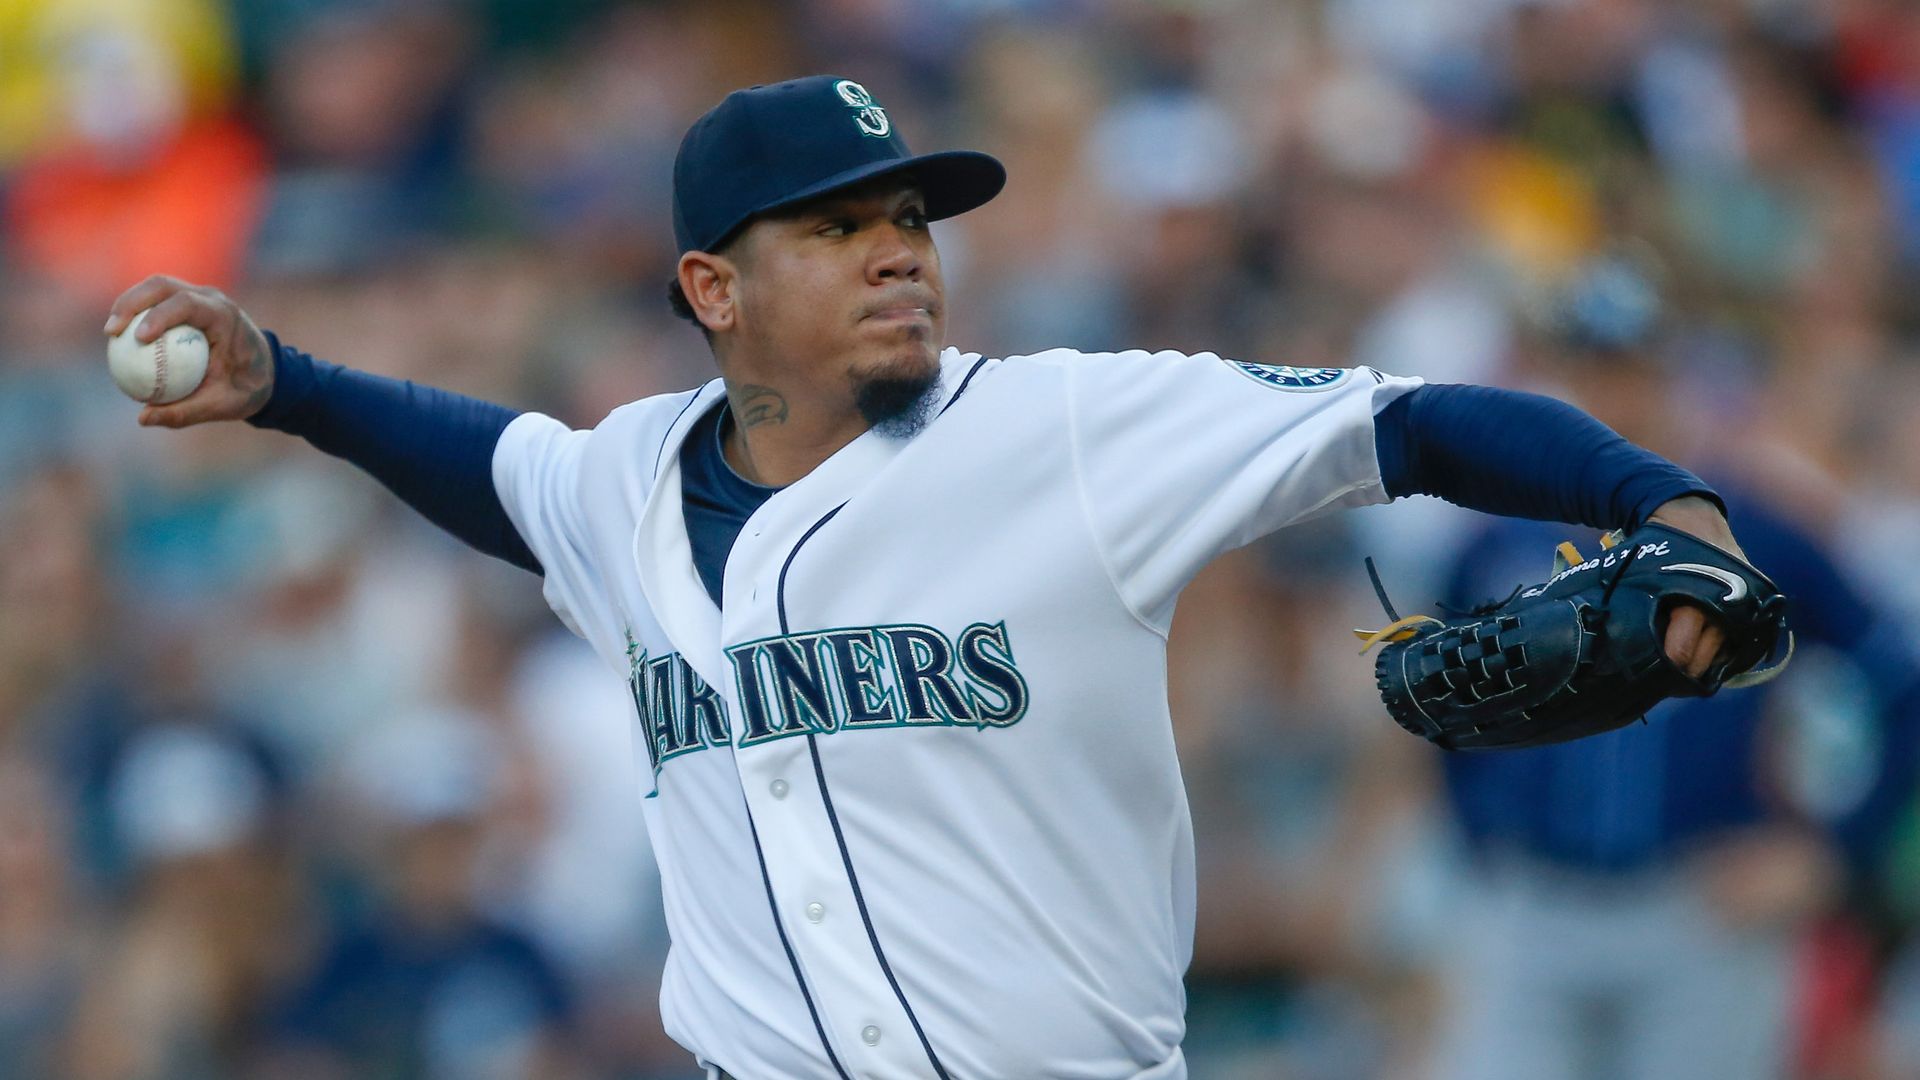 A man in a Mariners jersey and cap pulls back to wind up before throwing a pitch. 